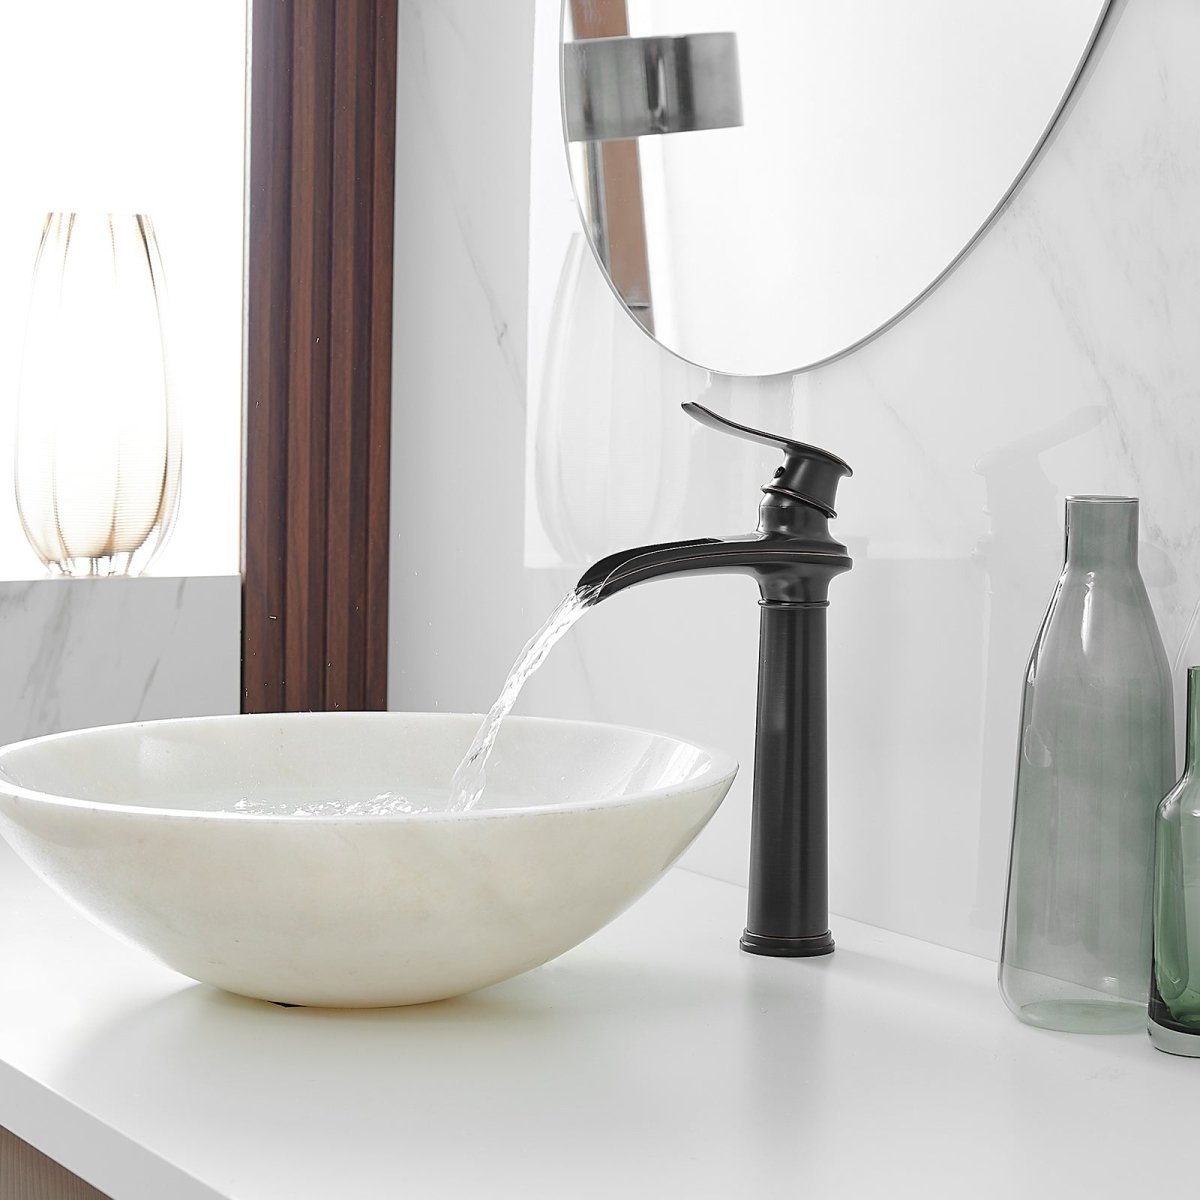 Waterfall Bathroom With Pop-up Drain Oil Rubbed Bronze - buyfaucet.com